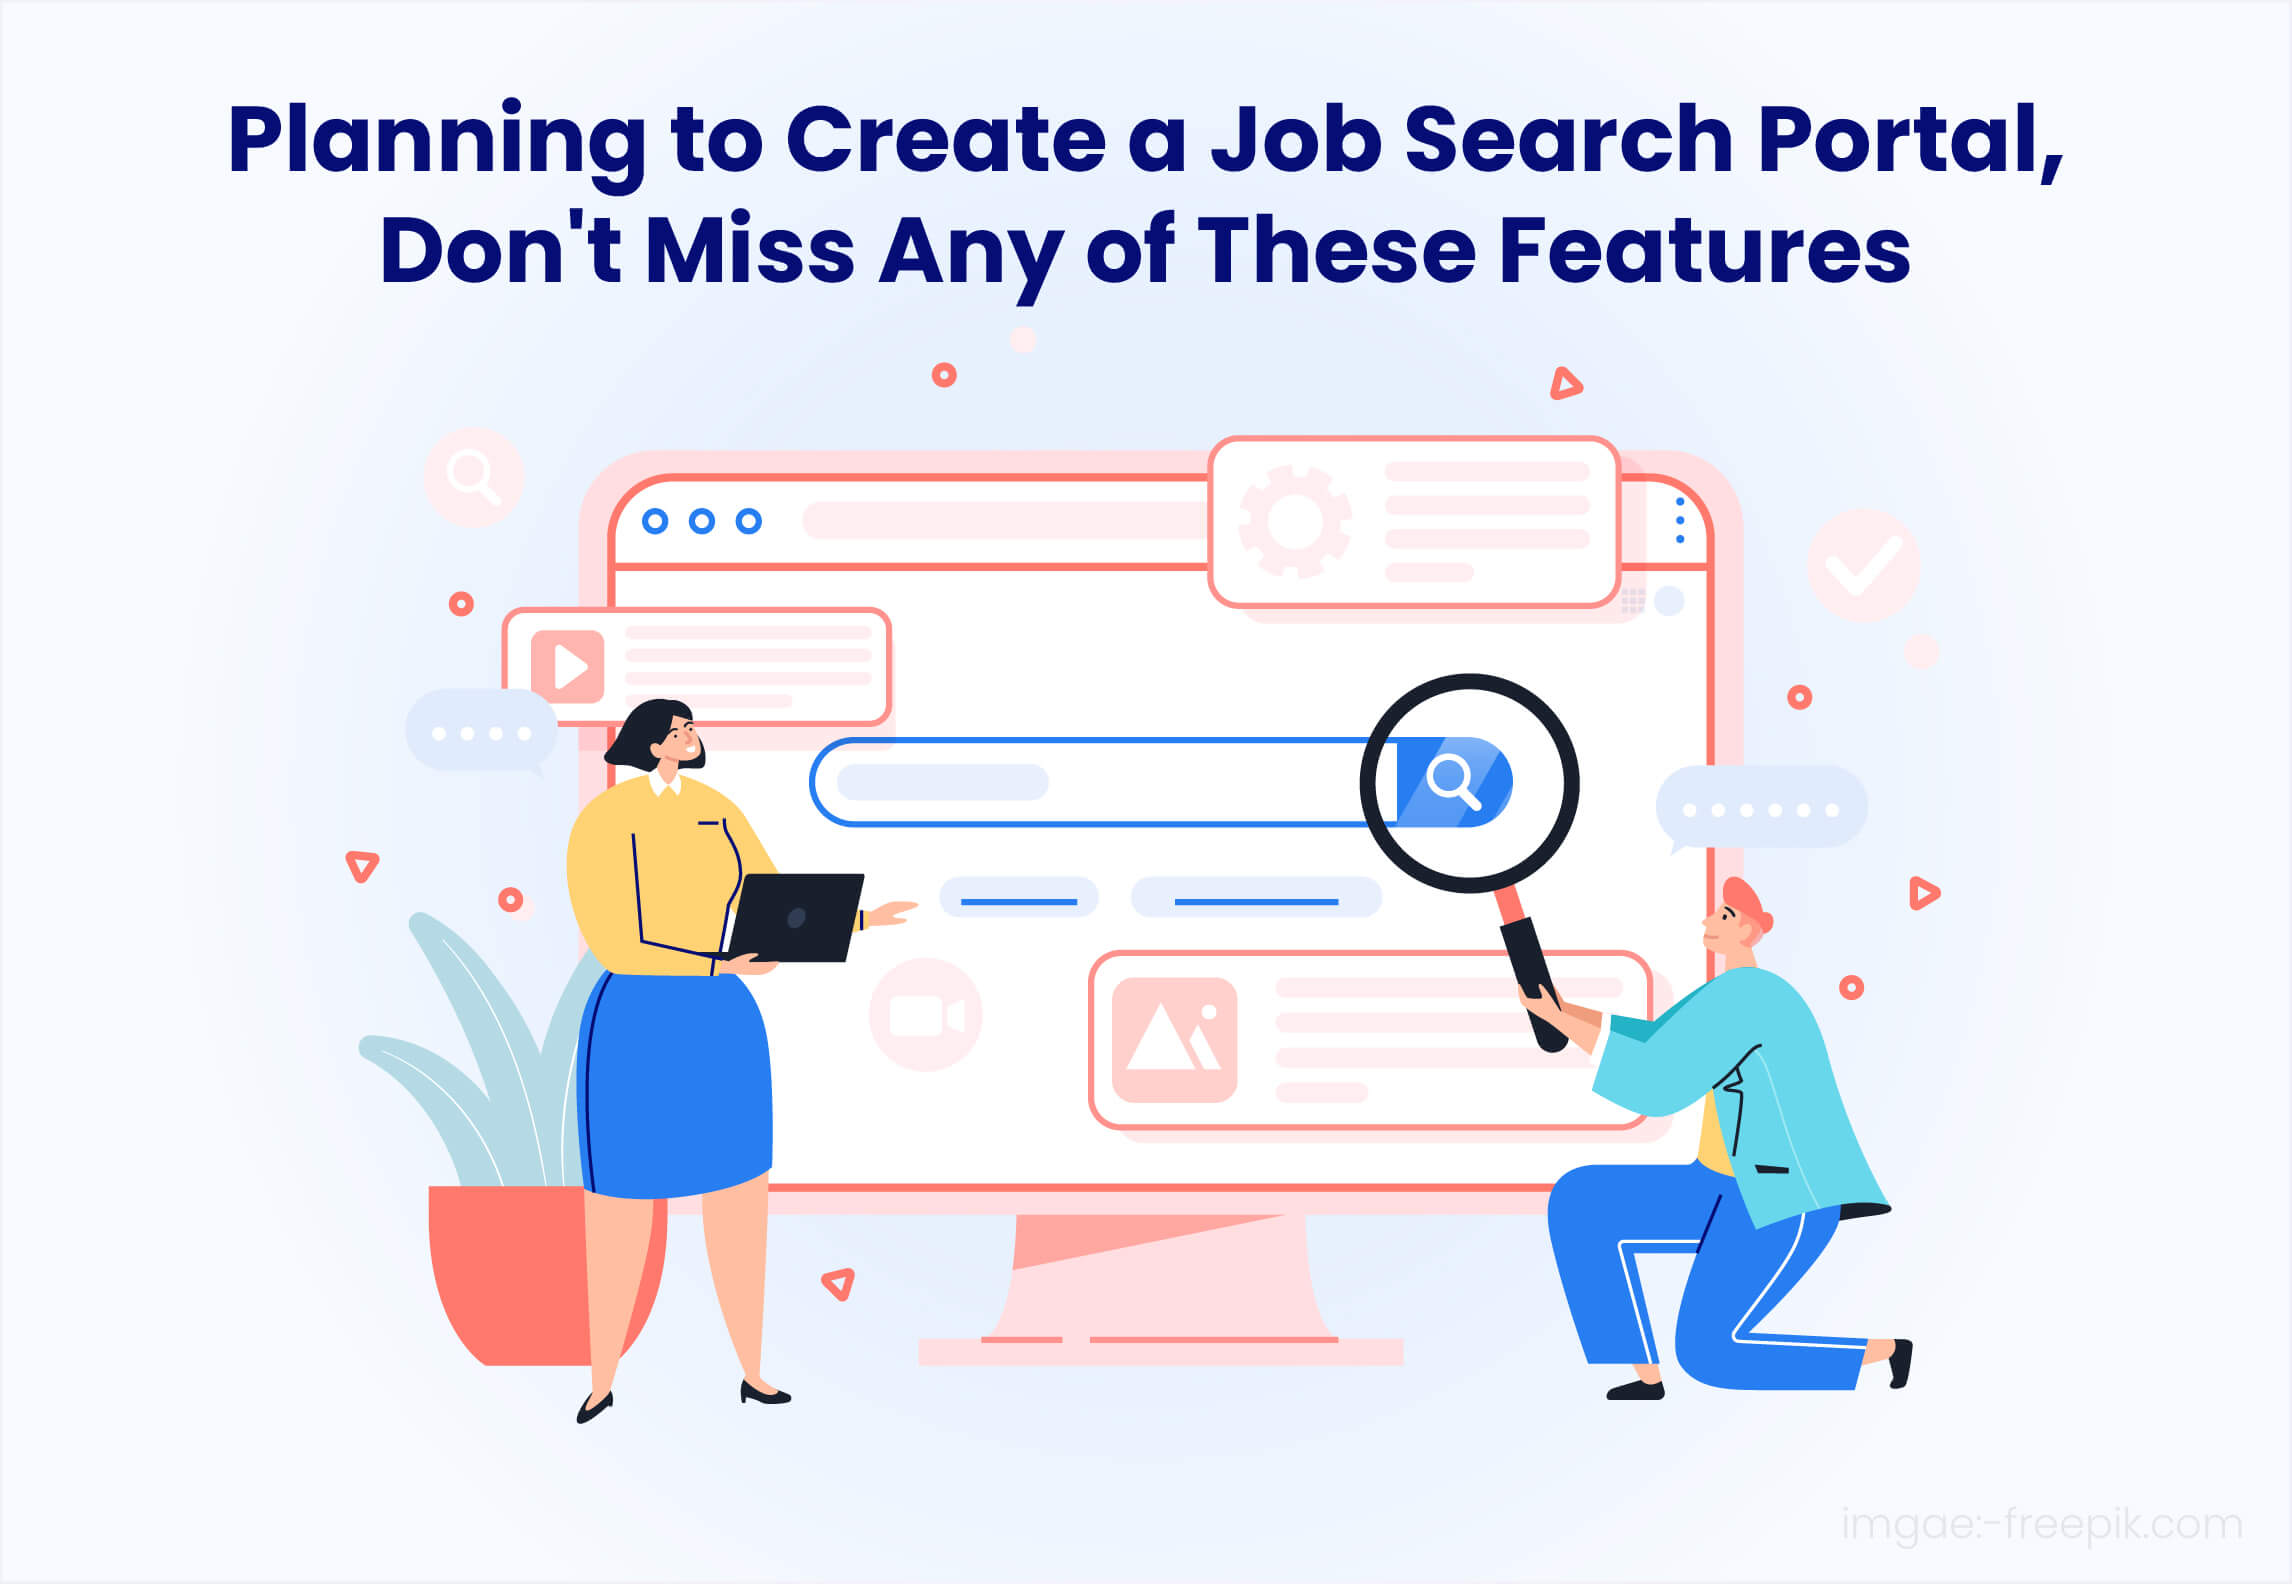 Planning to Create a Job Search Portal, Don’t Miss Any of These Features.